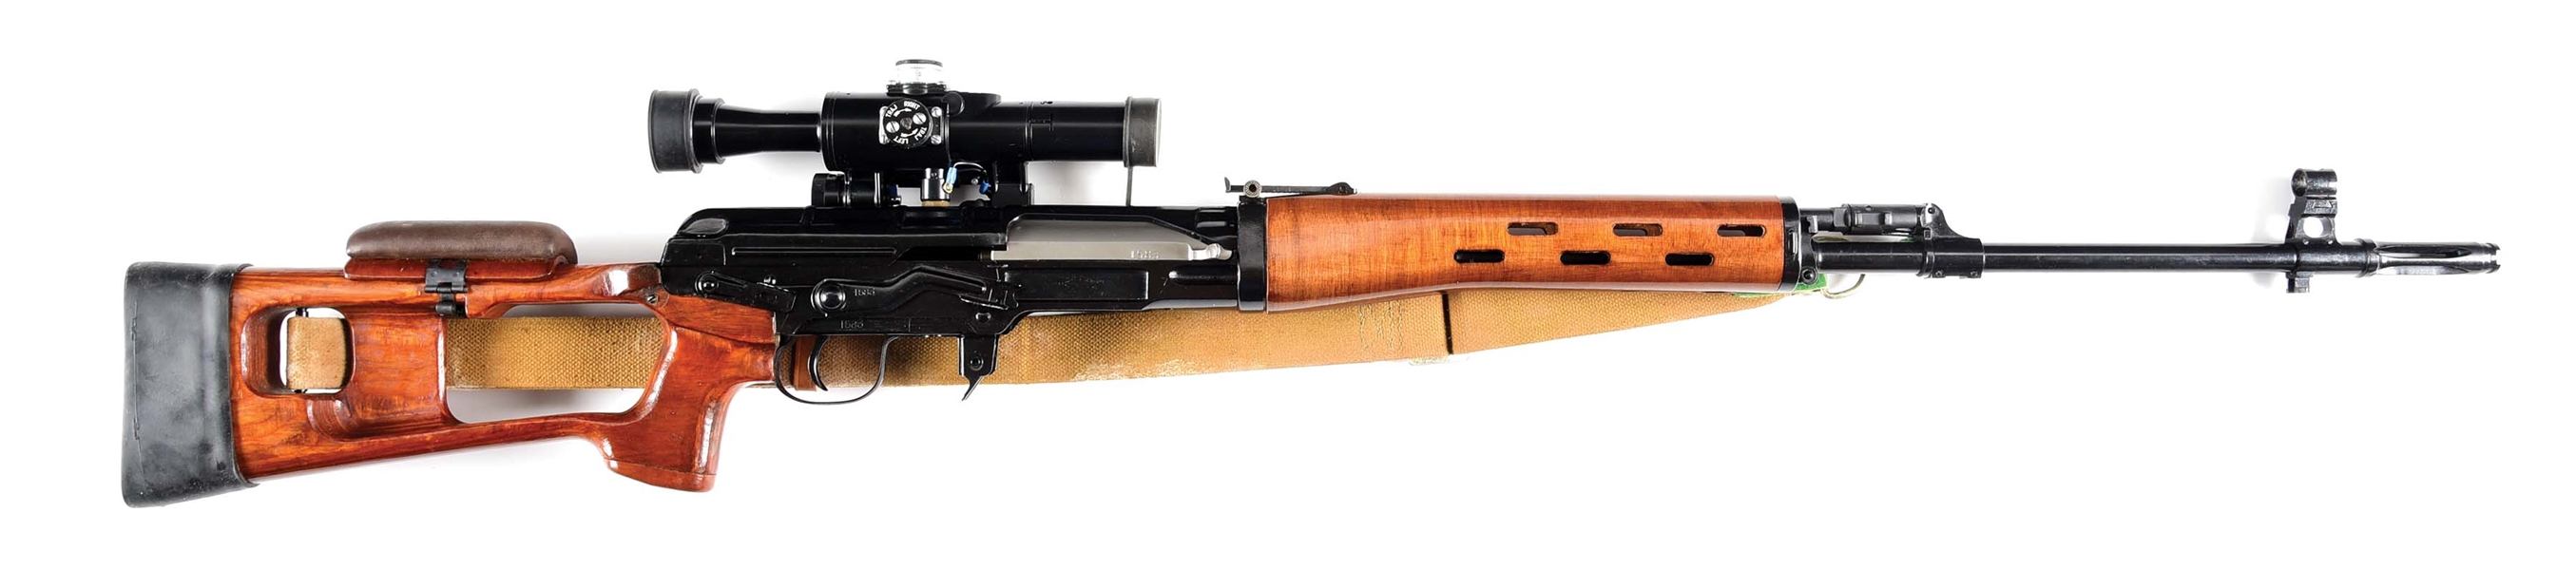 (M) EXCEPTIONAL AND SOUGHT AFTER CHINESE NORINCO NDM-86 (DRAGONOV) 7.62X54R SEMI-AUTOMATIC SNIPER RIFLE WITH DELUXE PACKAGE KIT.